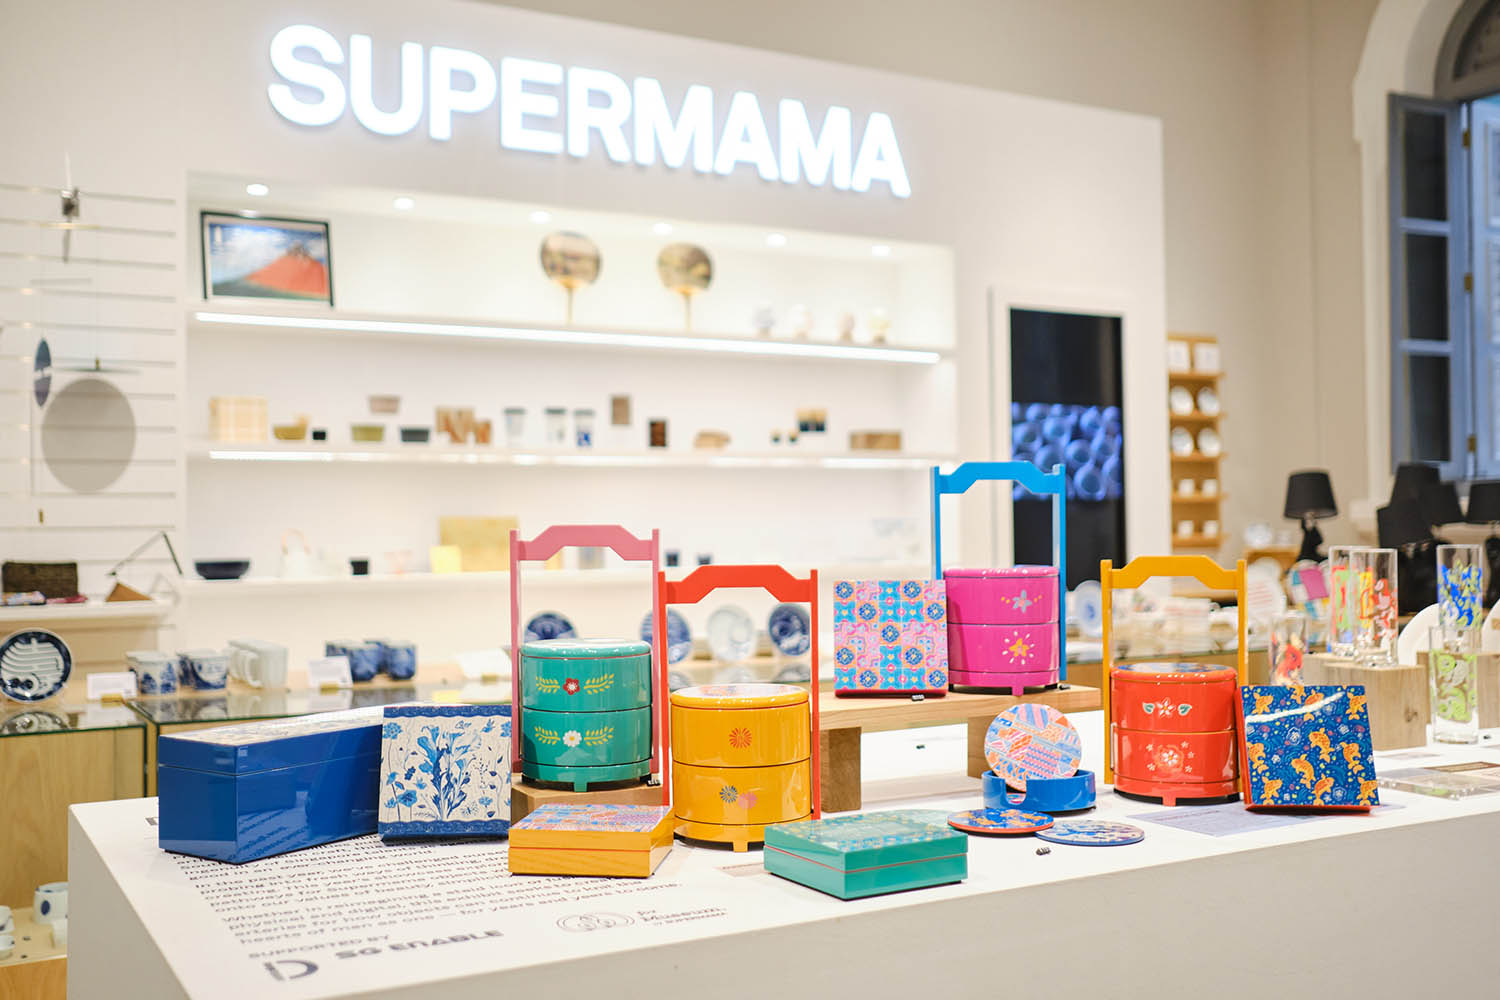 A set of lacquerware with colourful batik-inspired designs on display in a store